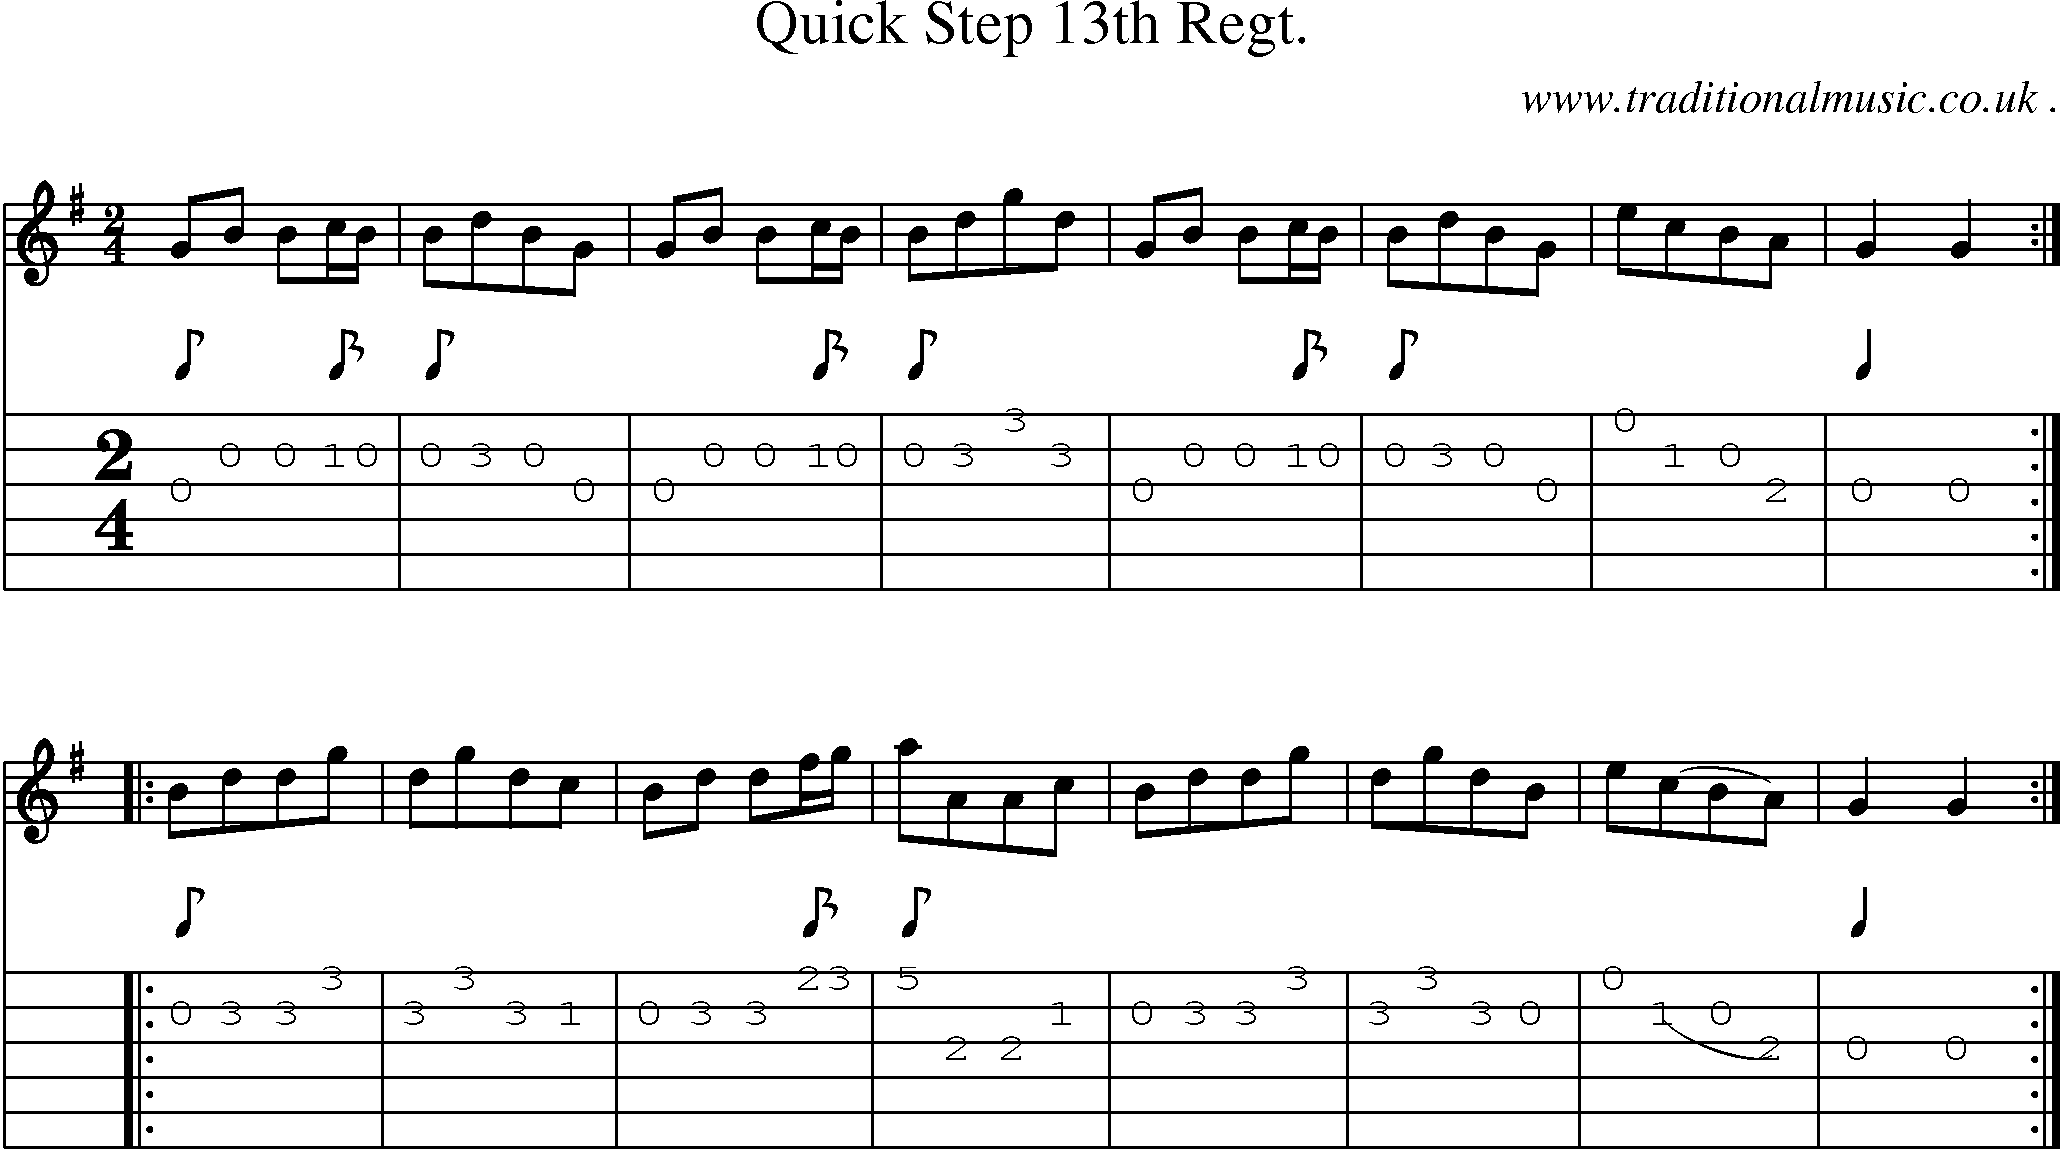 Sheet-music  score, Chords and Guitar Tabs for Quick Step 13th Regt